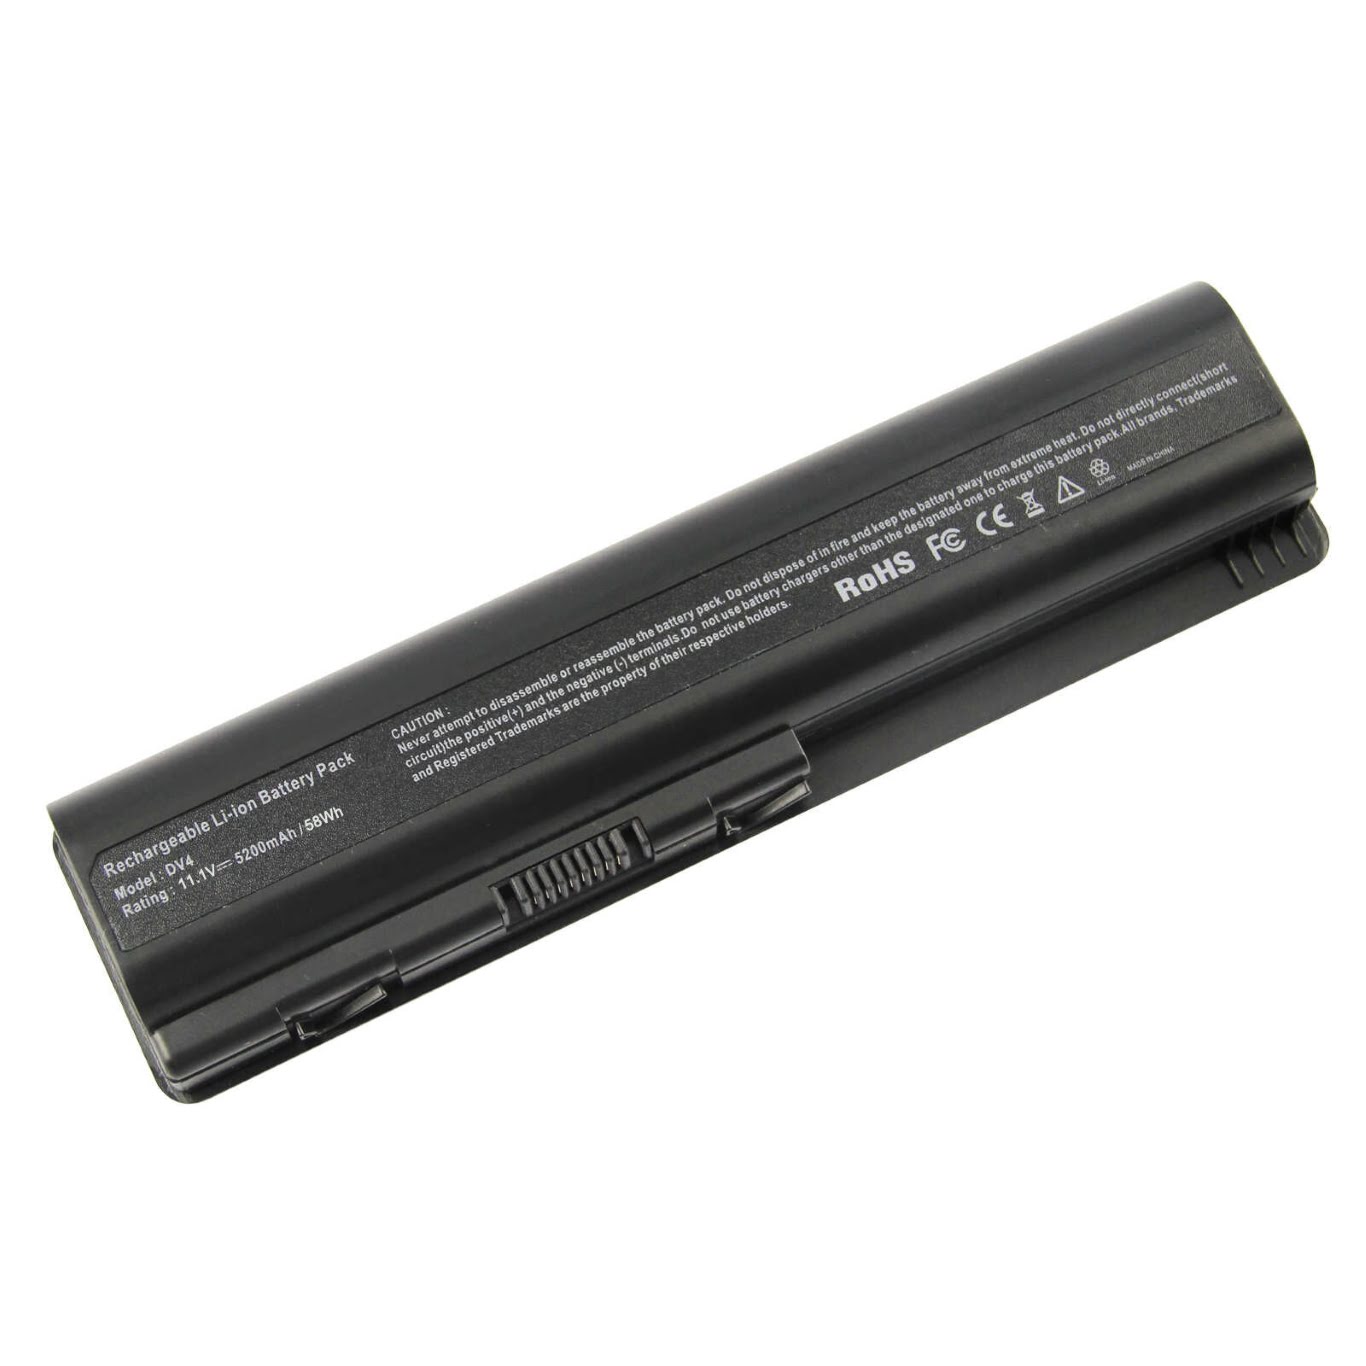 462889-121, 462889-421 replacement Laptop Battery for HP DV4T-1100 CTO, DV4T-1200 CTO